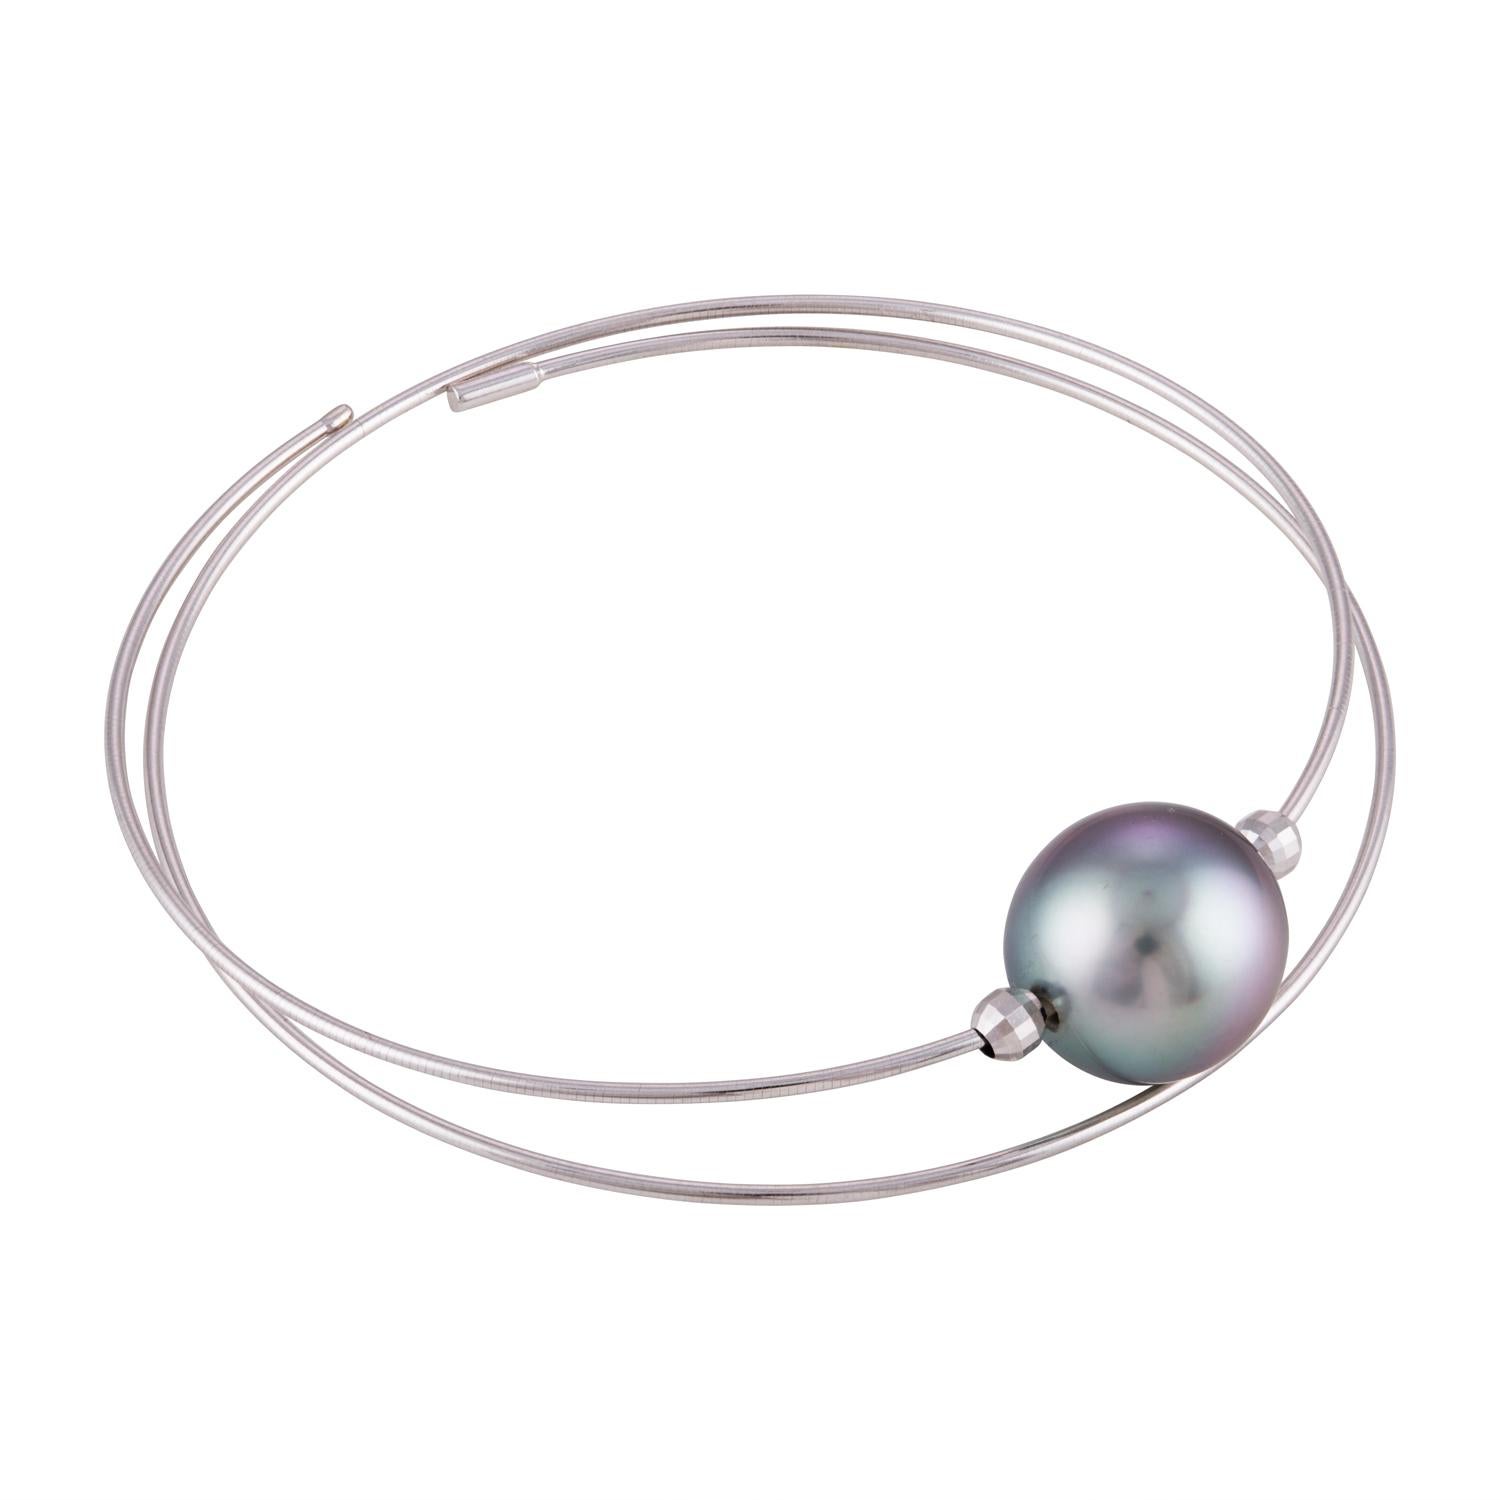 This stackable bangle features a South Sea Tahitian round pearl measuring 12.6mm on an 18K rose gold wire.
This can be worn individually or stacked with others.
Please note, the price is for one bangle.